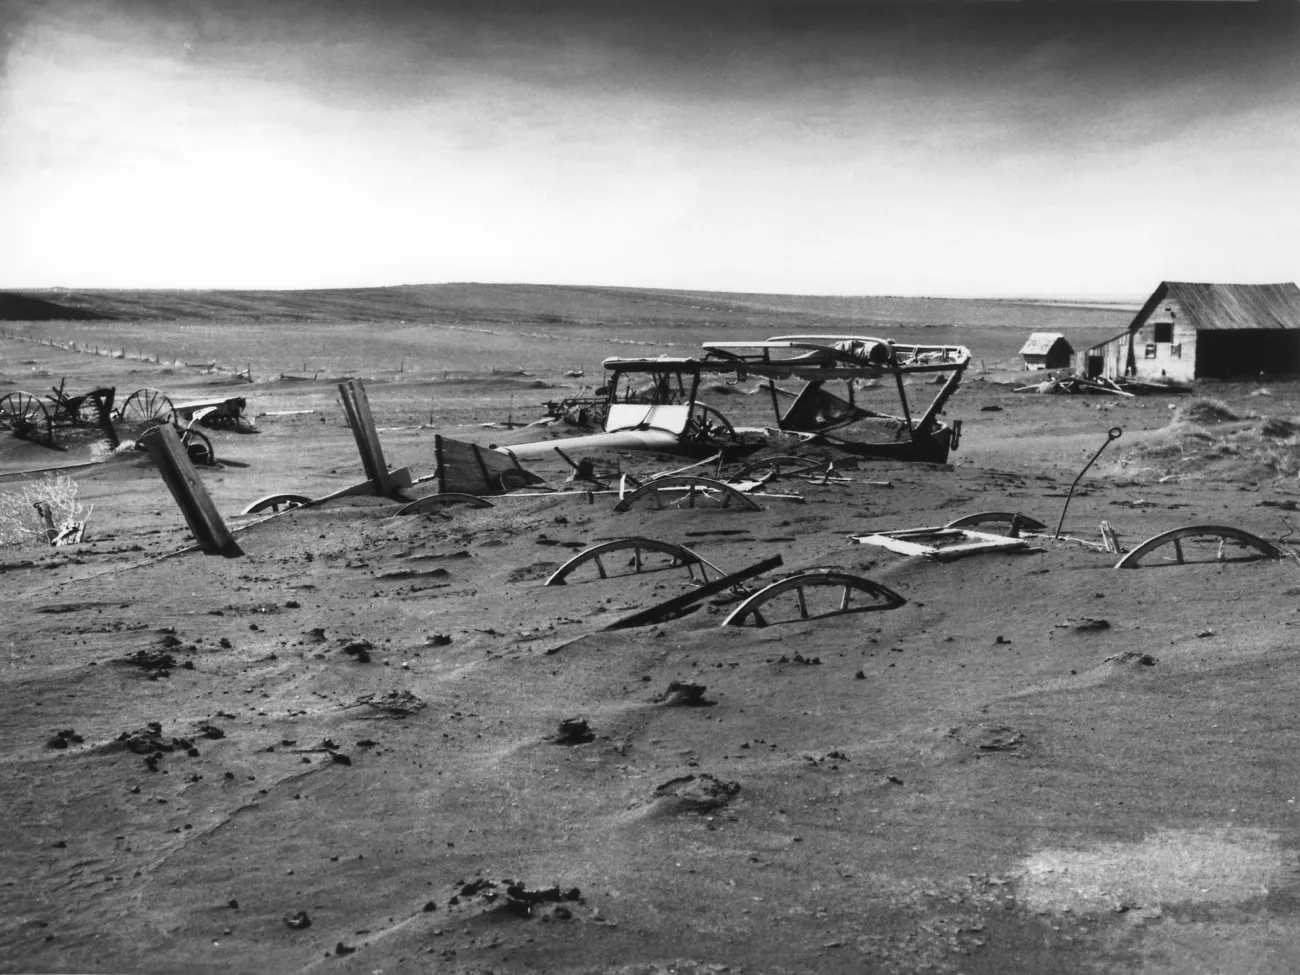 Buried machinery in barn lot in Dallas, South Dakota, United States during the Dust Bowl, an agricultural, ecological, and economic disaster in the Great Plains region of North America in 1936. Sourced from United States Department of Agriculture, Image Number: 00di0971/Wikimedia Commons. Image in the Public Domain.